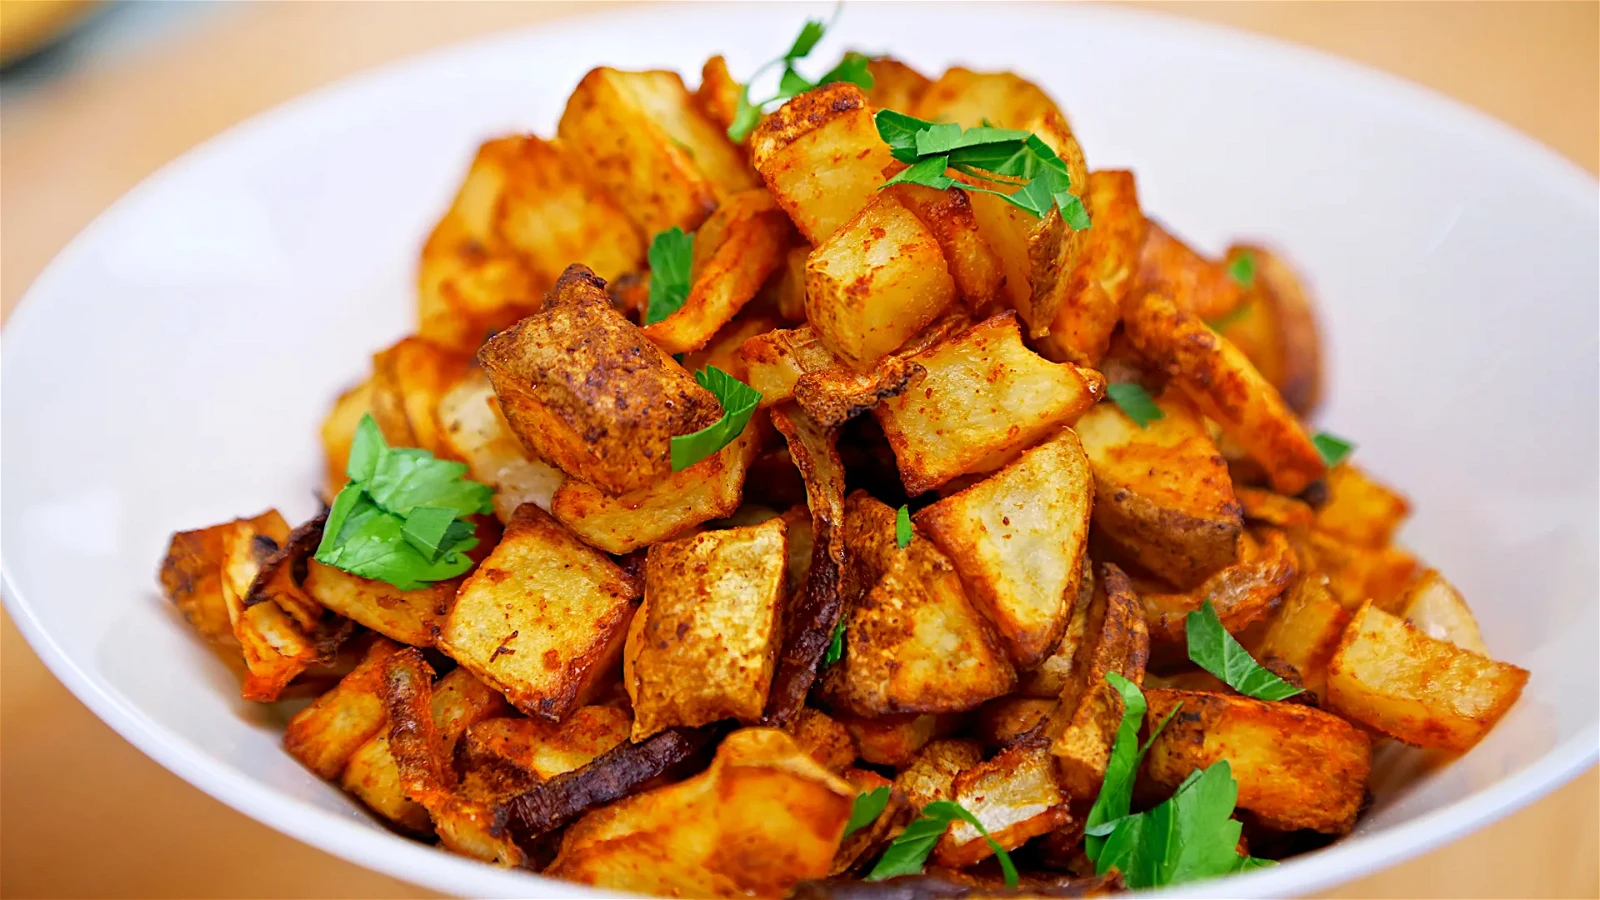 Image of Spicy Home Fries